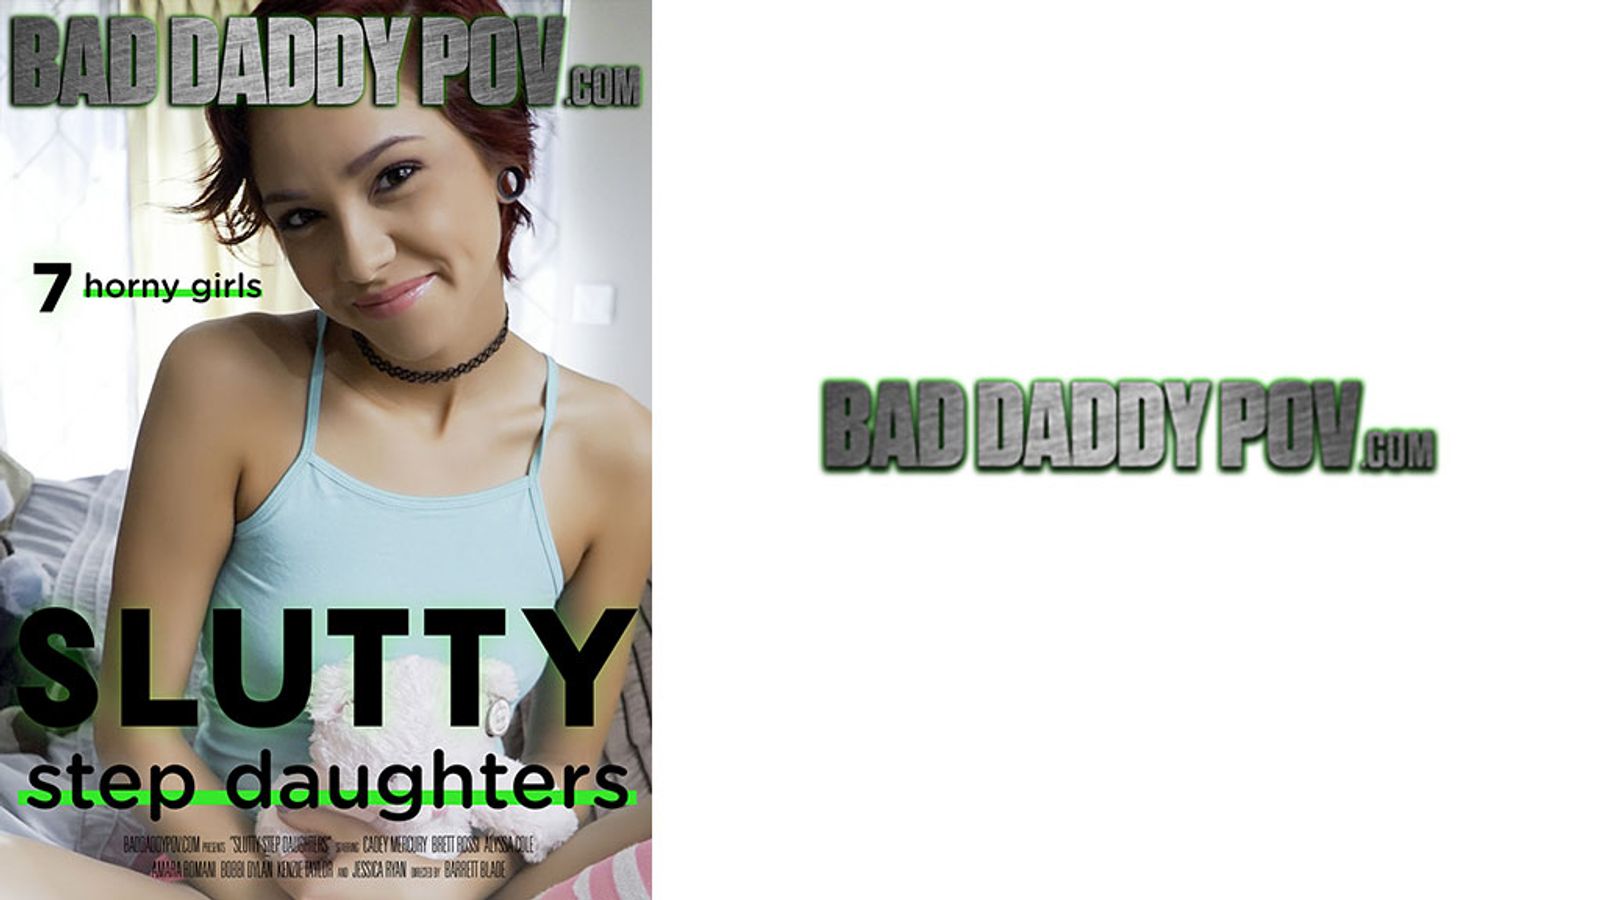 Fauxcest Site BadDaddyPOV.com Releases ‘Slutty Step Daughters’